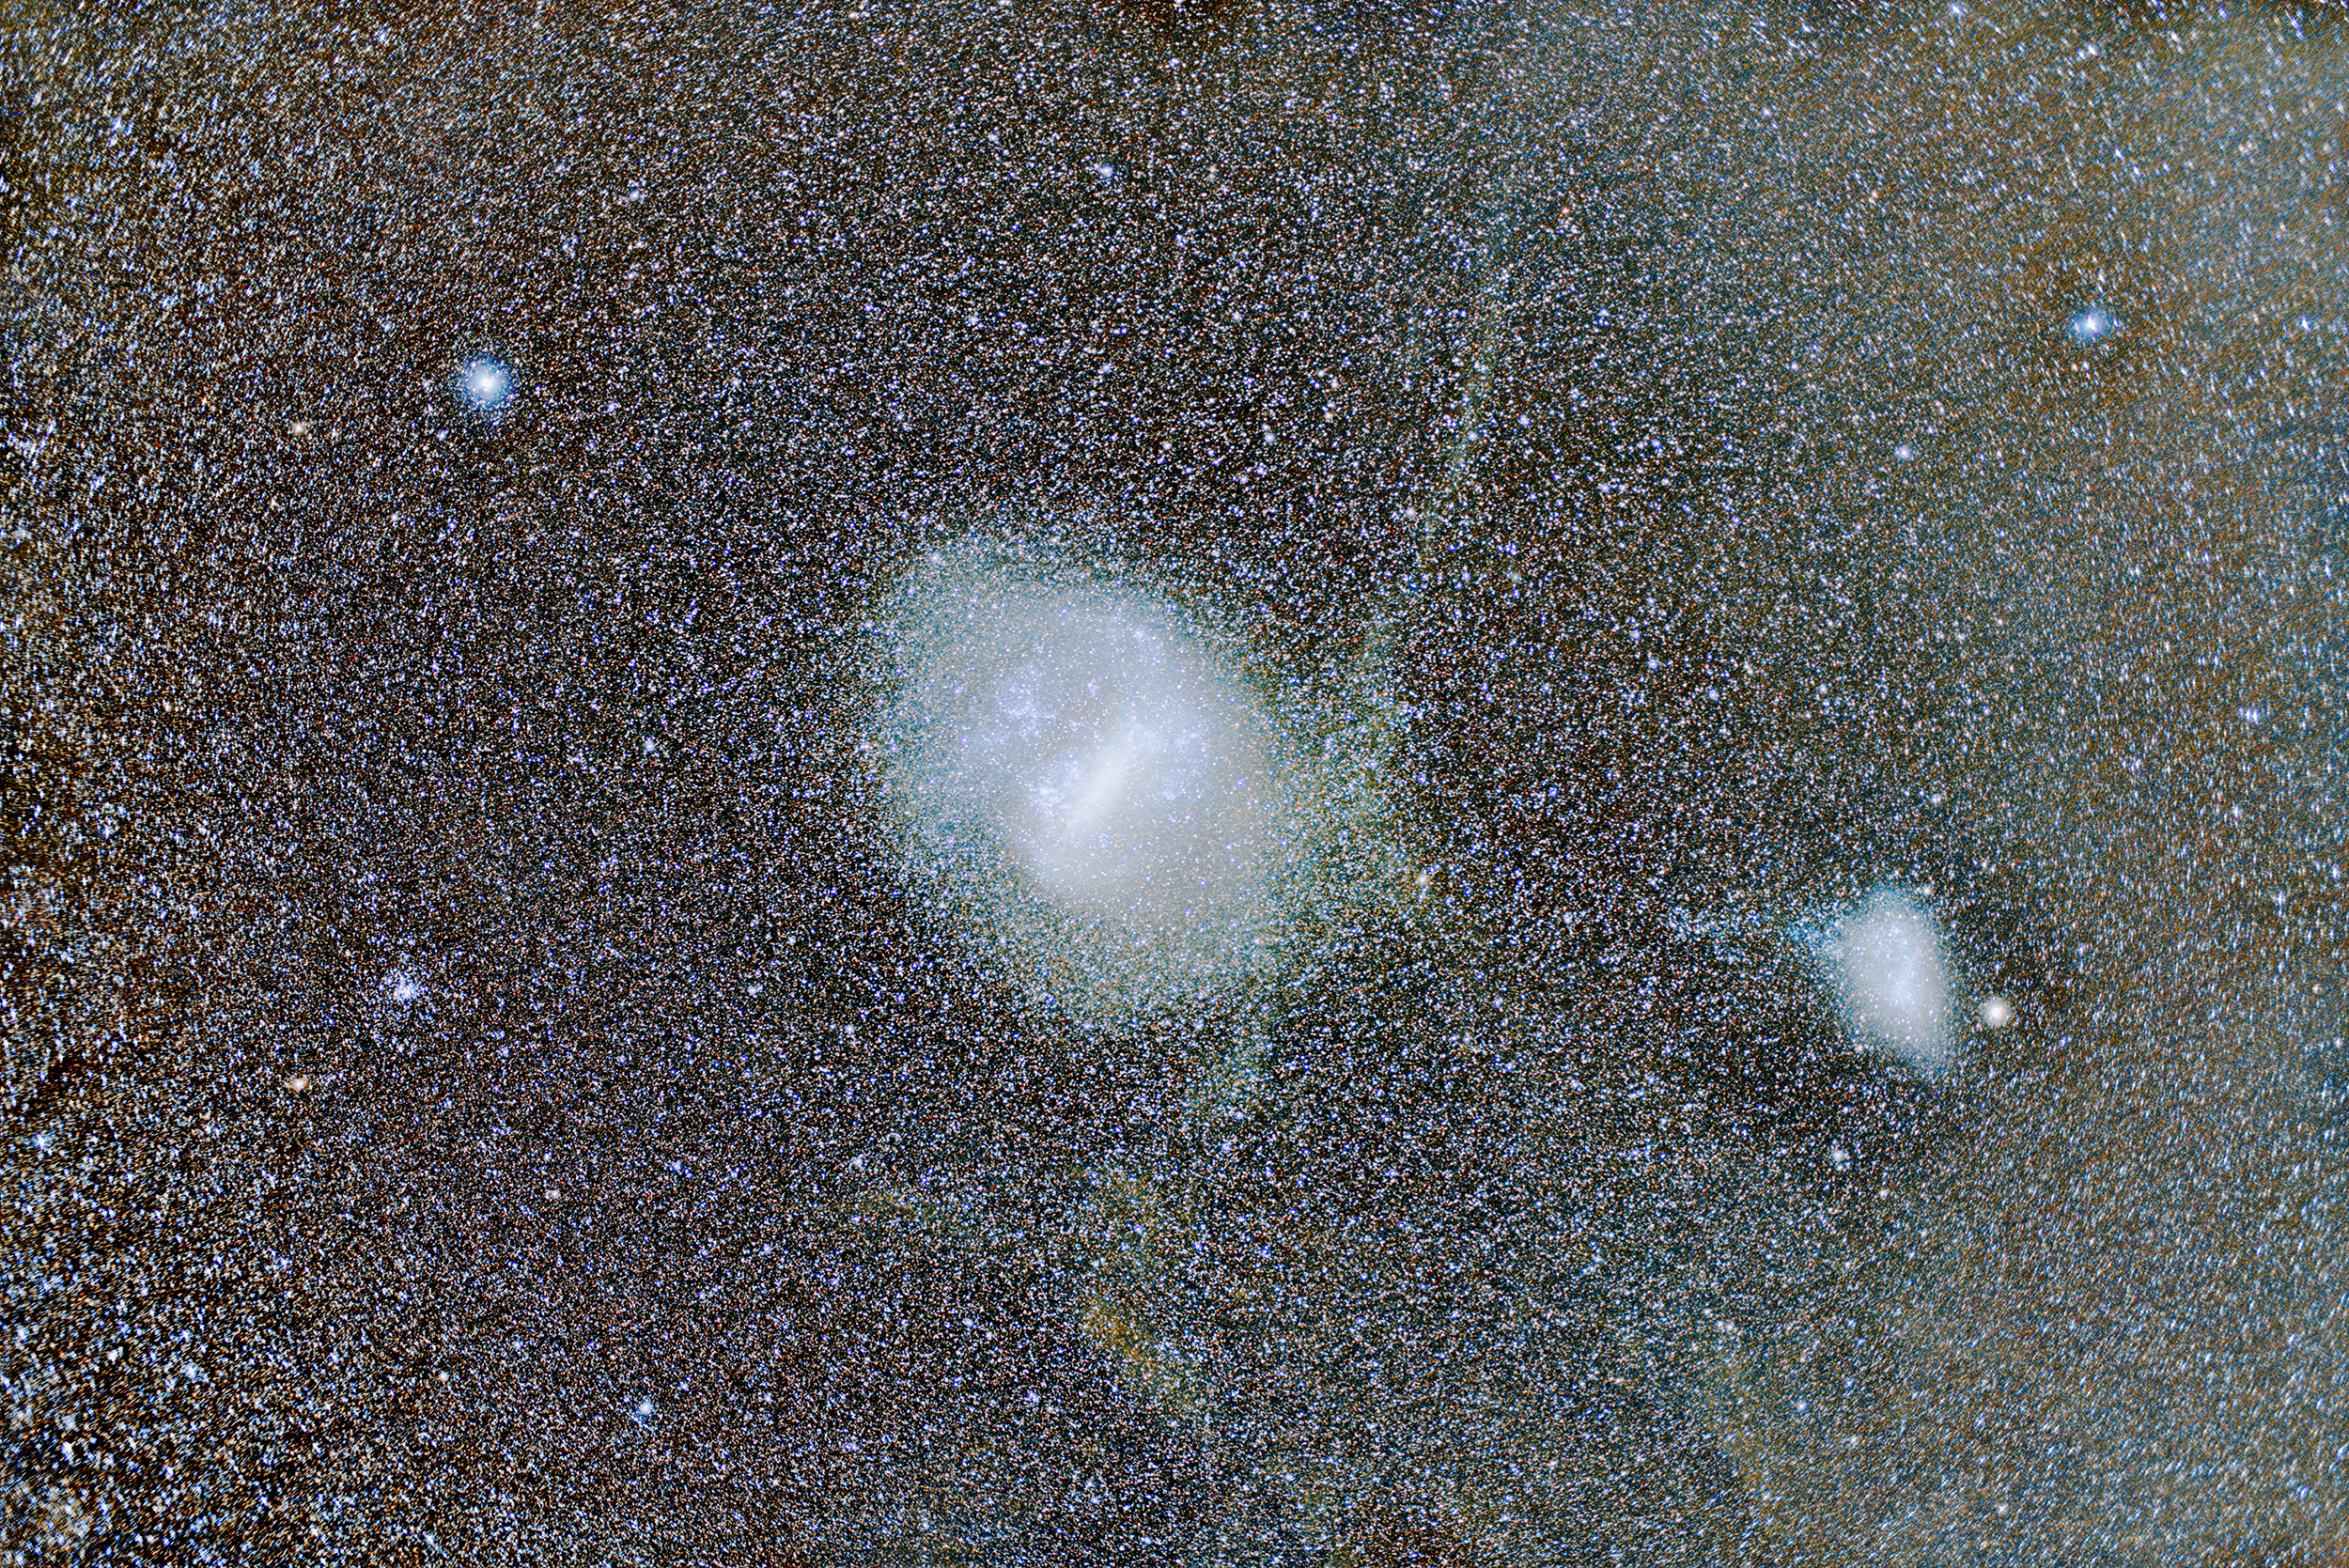 The Large and Small Magellanic Clouds, tidal star streams, extended halo and dust